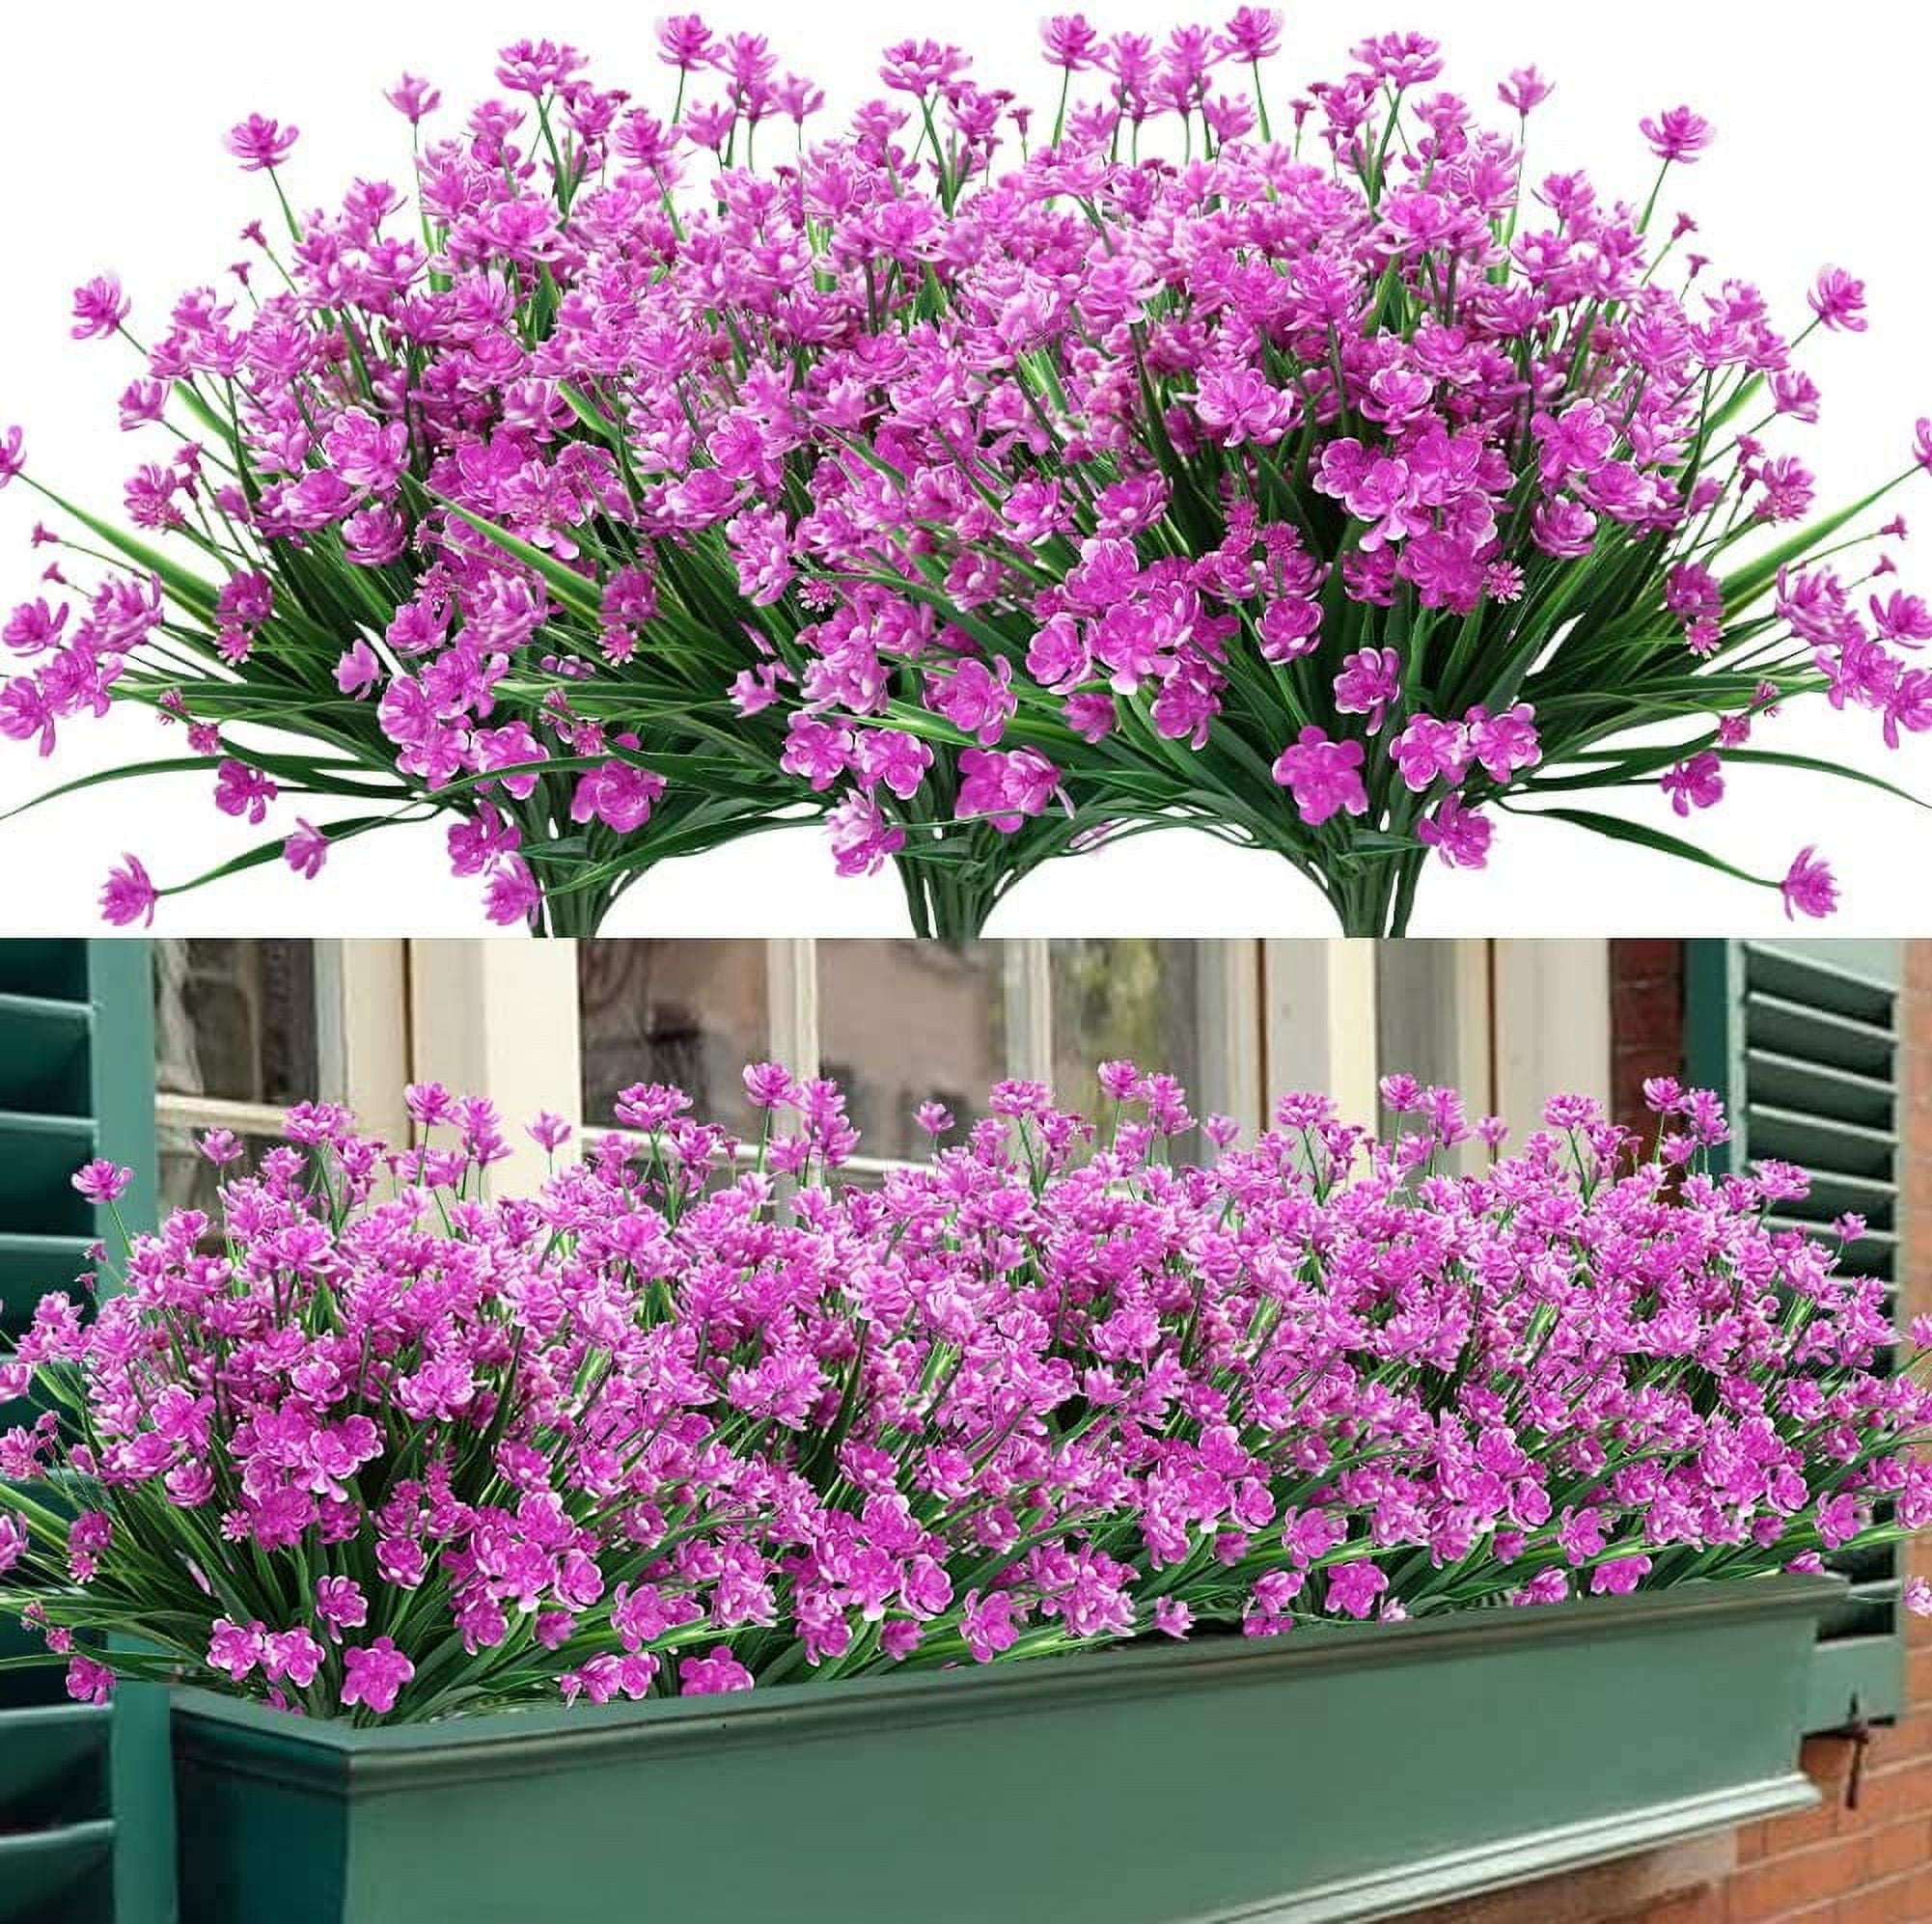  YXYQR 8 Pack UV Resistant Outdoor Artificial Flowers Bulk Faux  Plastic Plants Outside Indoor Fake Hanging Greenery Shrubs Arrangement for  Backyard Window Box Porch Home Decoration (Purple) : Home & Kitchen